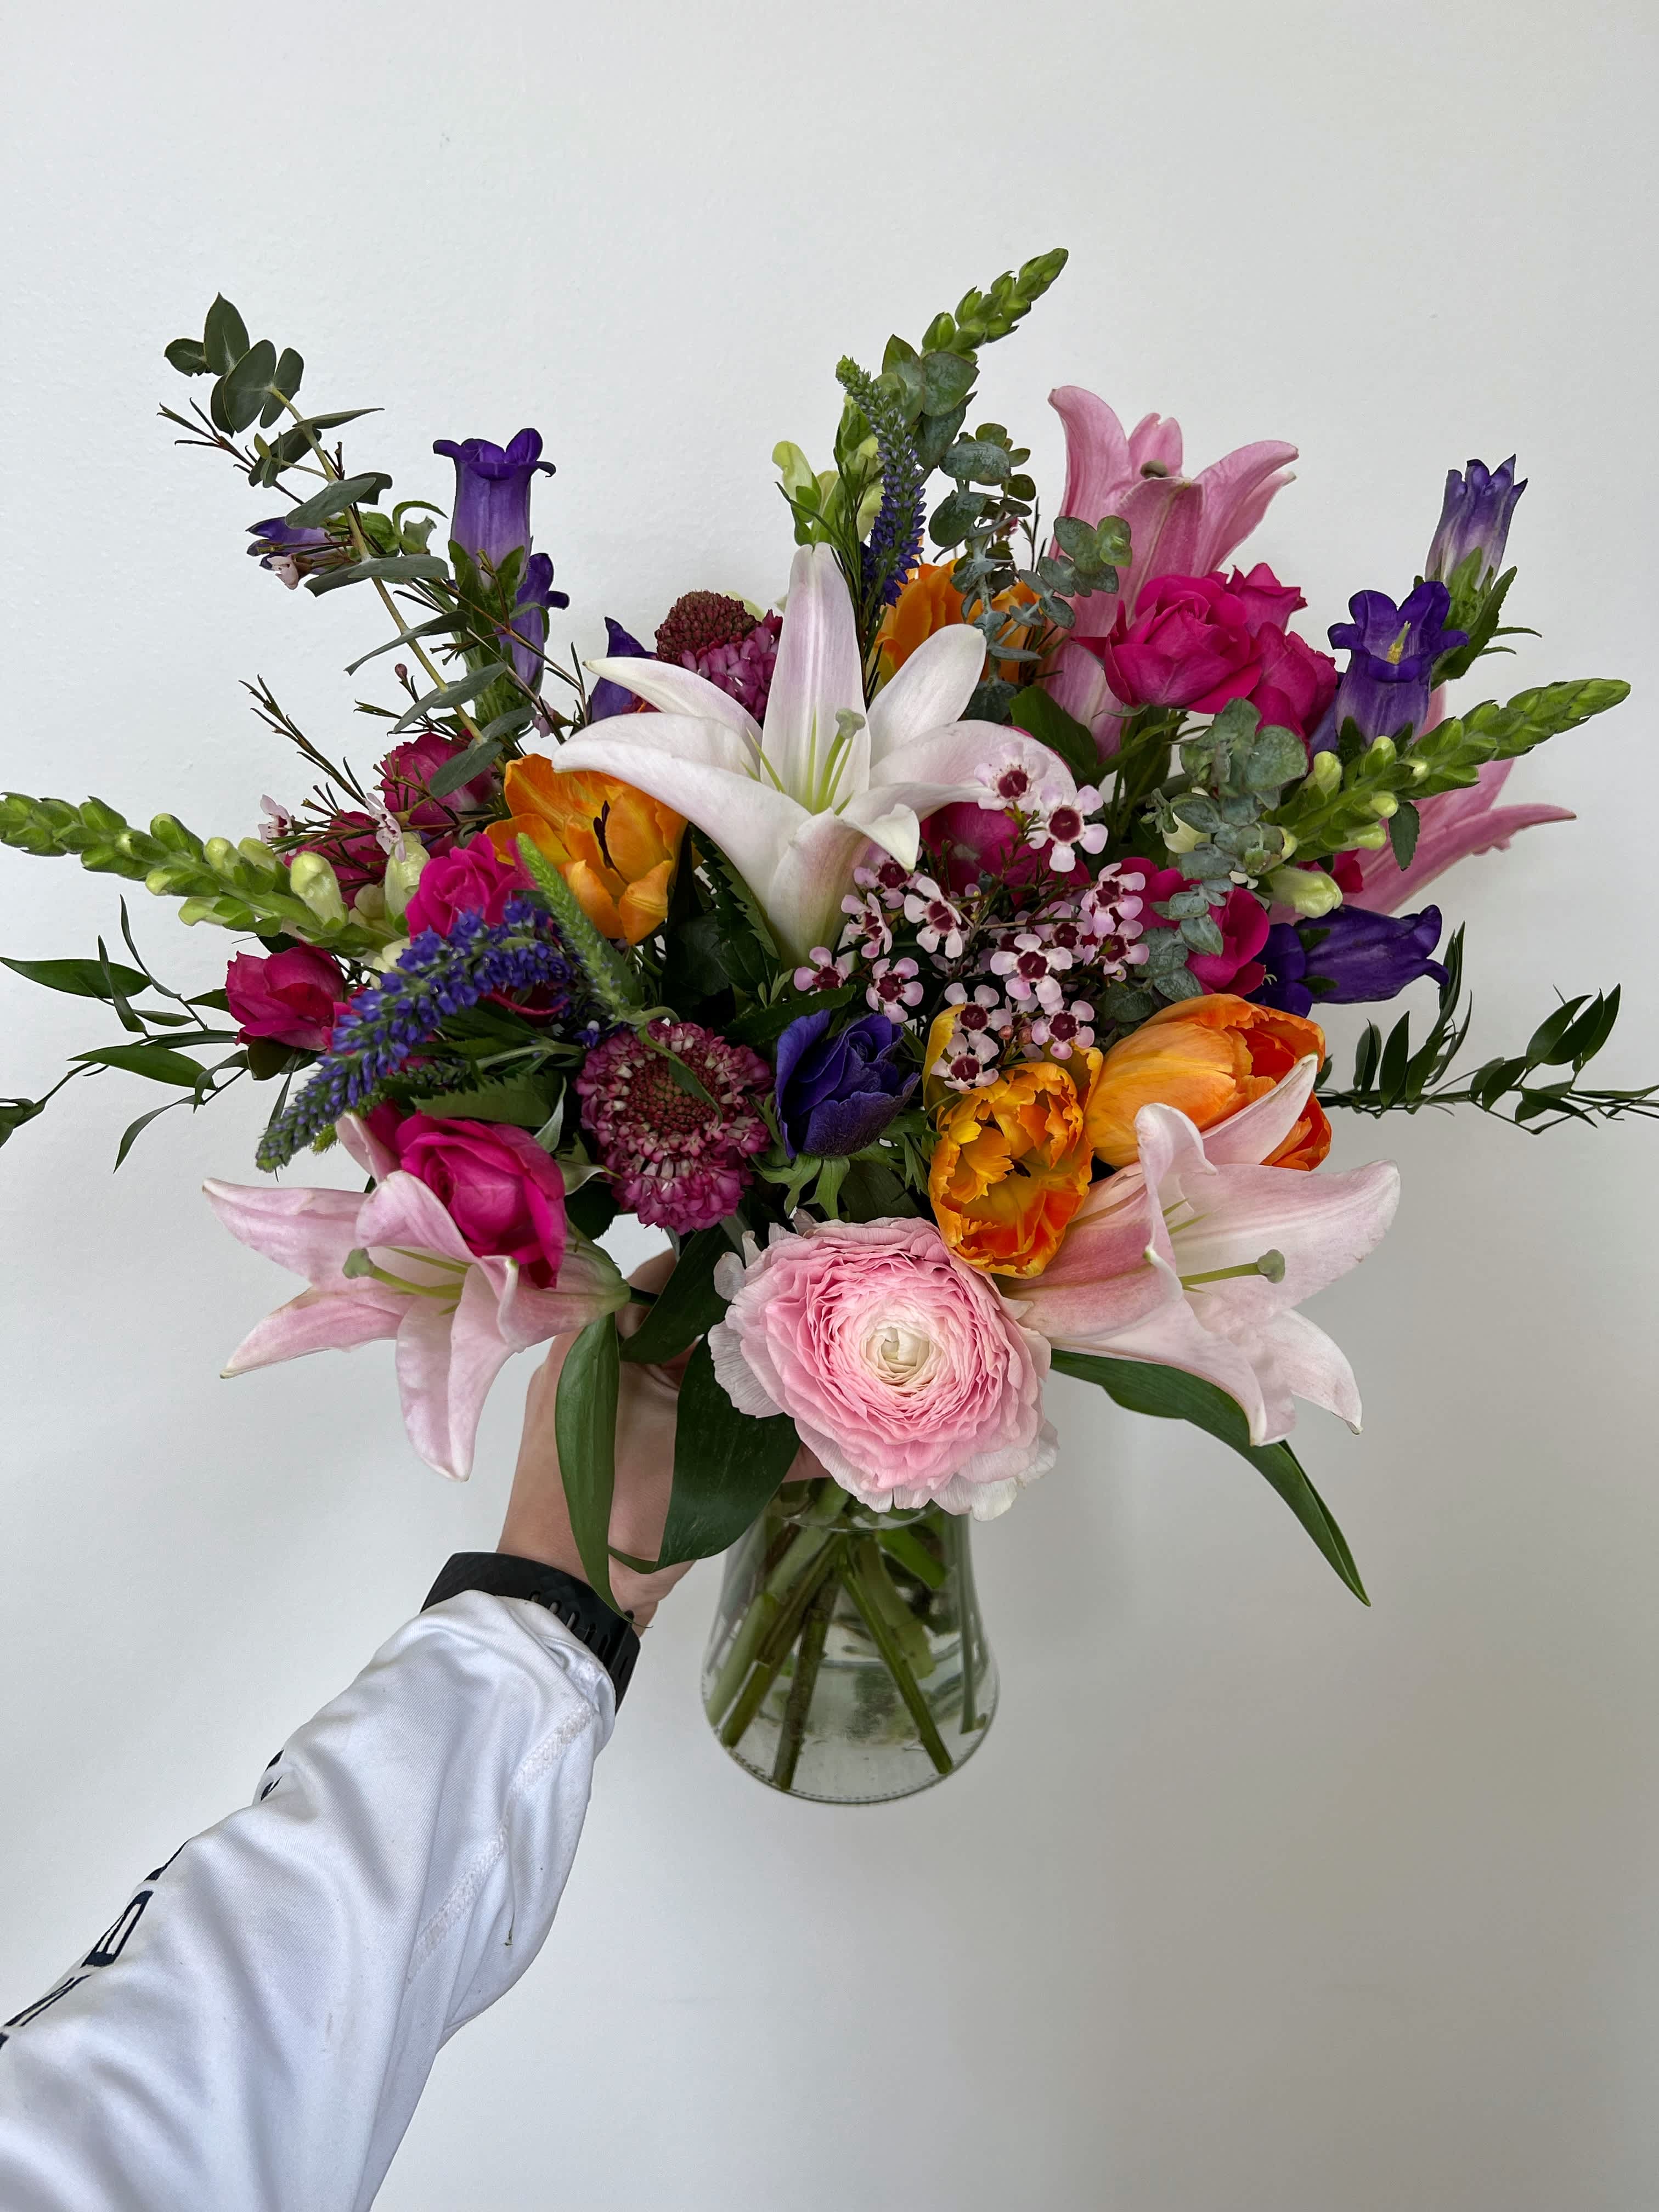 The Rachel - Meet “The Rachel”, an arrangement that will bring a smile to their face! Bright bold colors arranged tall with the freshest florals. 